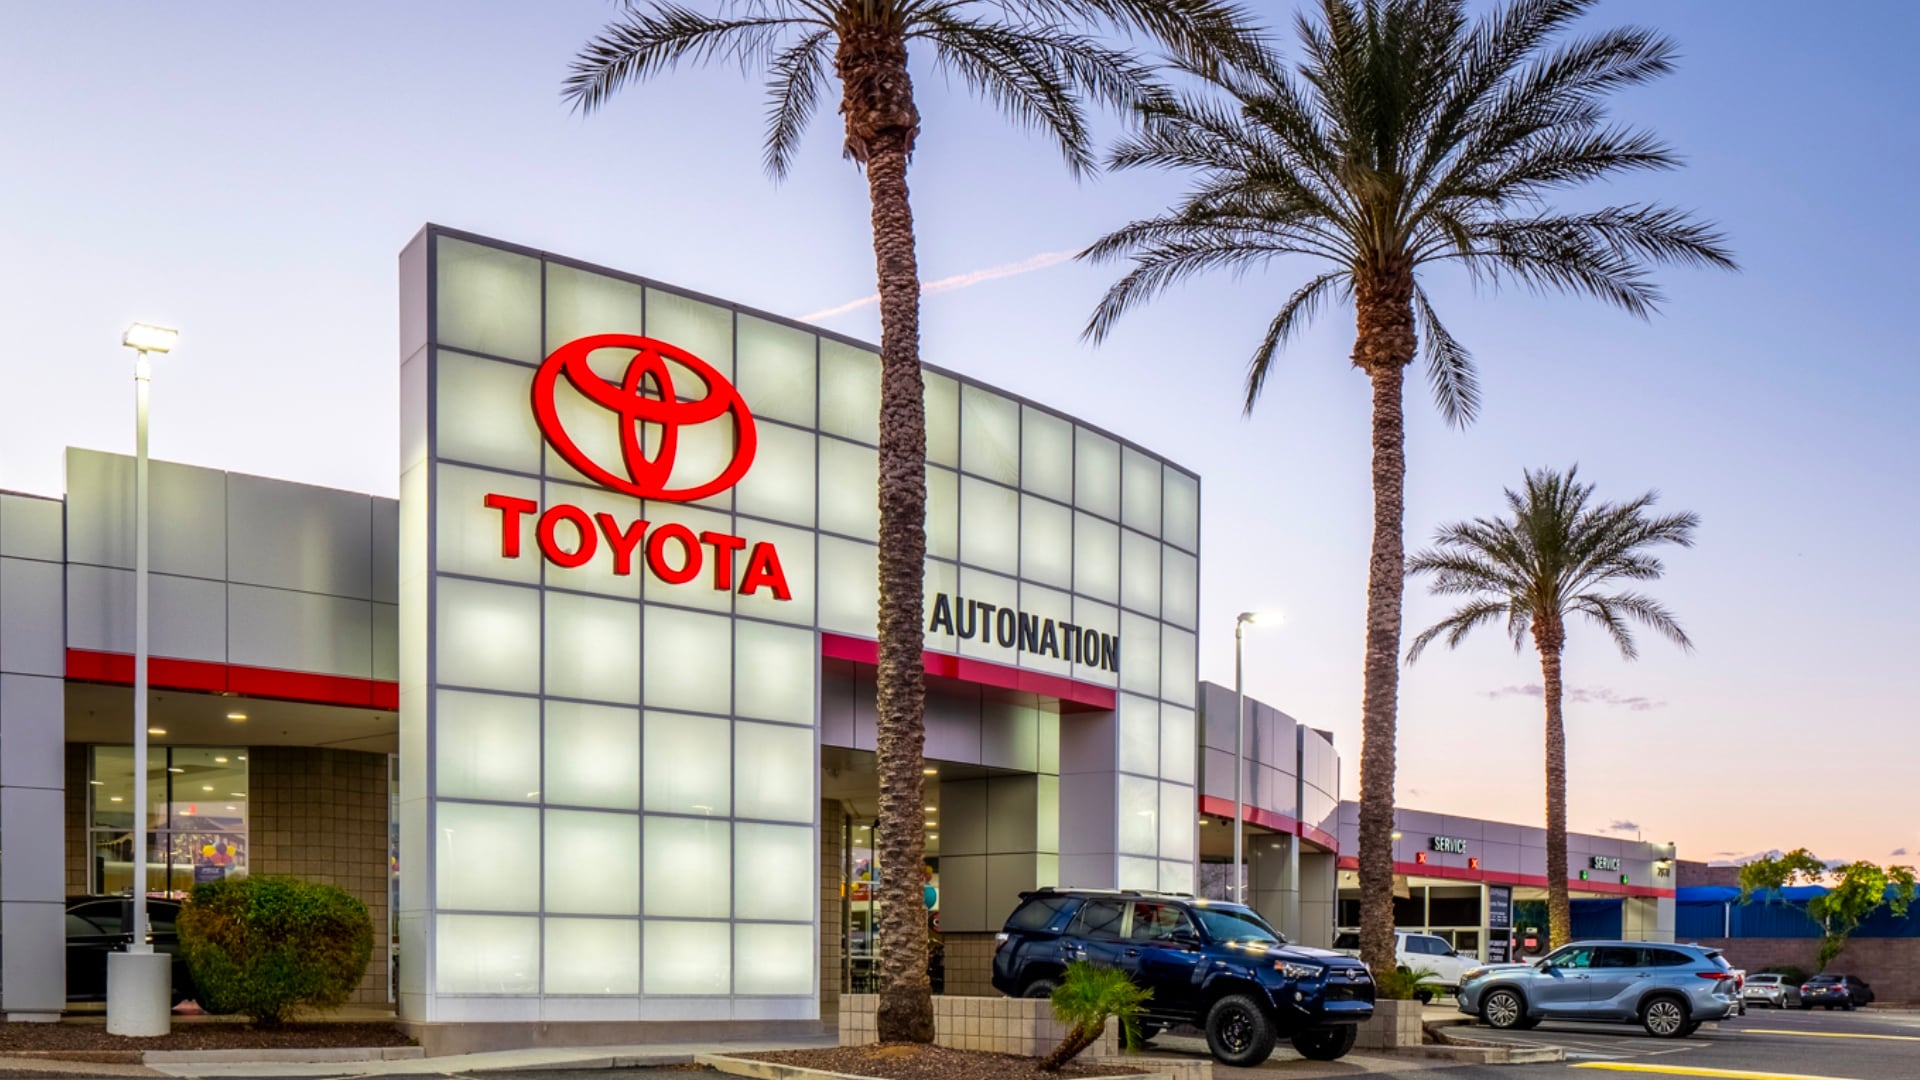 Exterior view of AutoNation Toyota Tempe. The building is grey and white and has some large windows. Several vehicles are seen near the building, which has several palm trees near it.